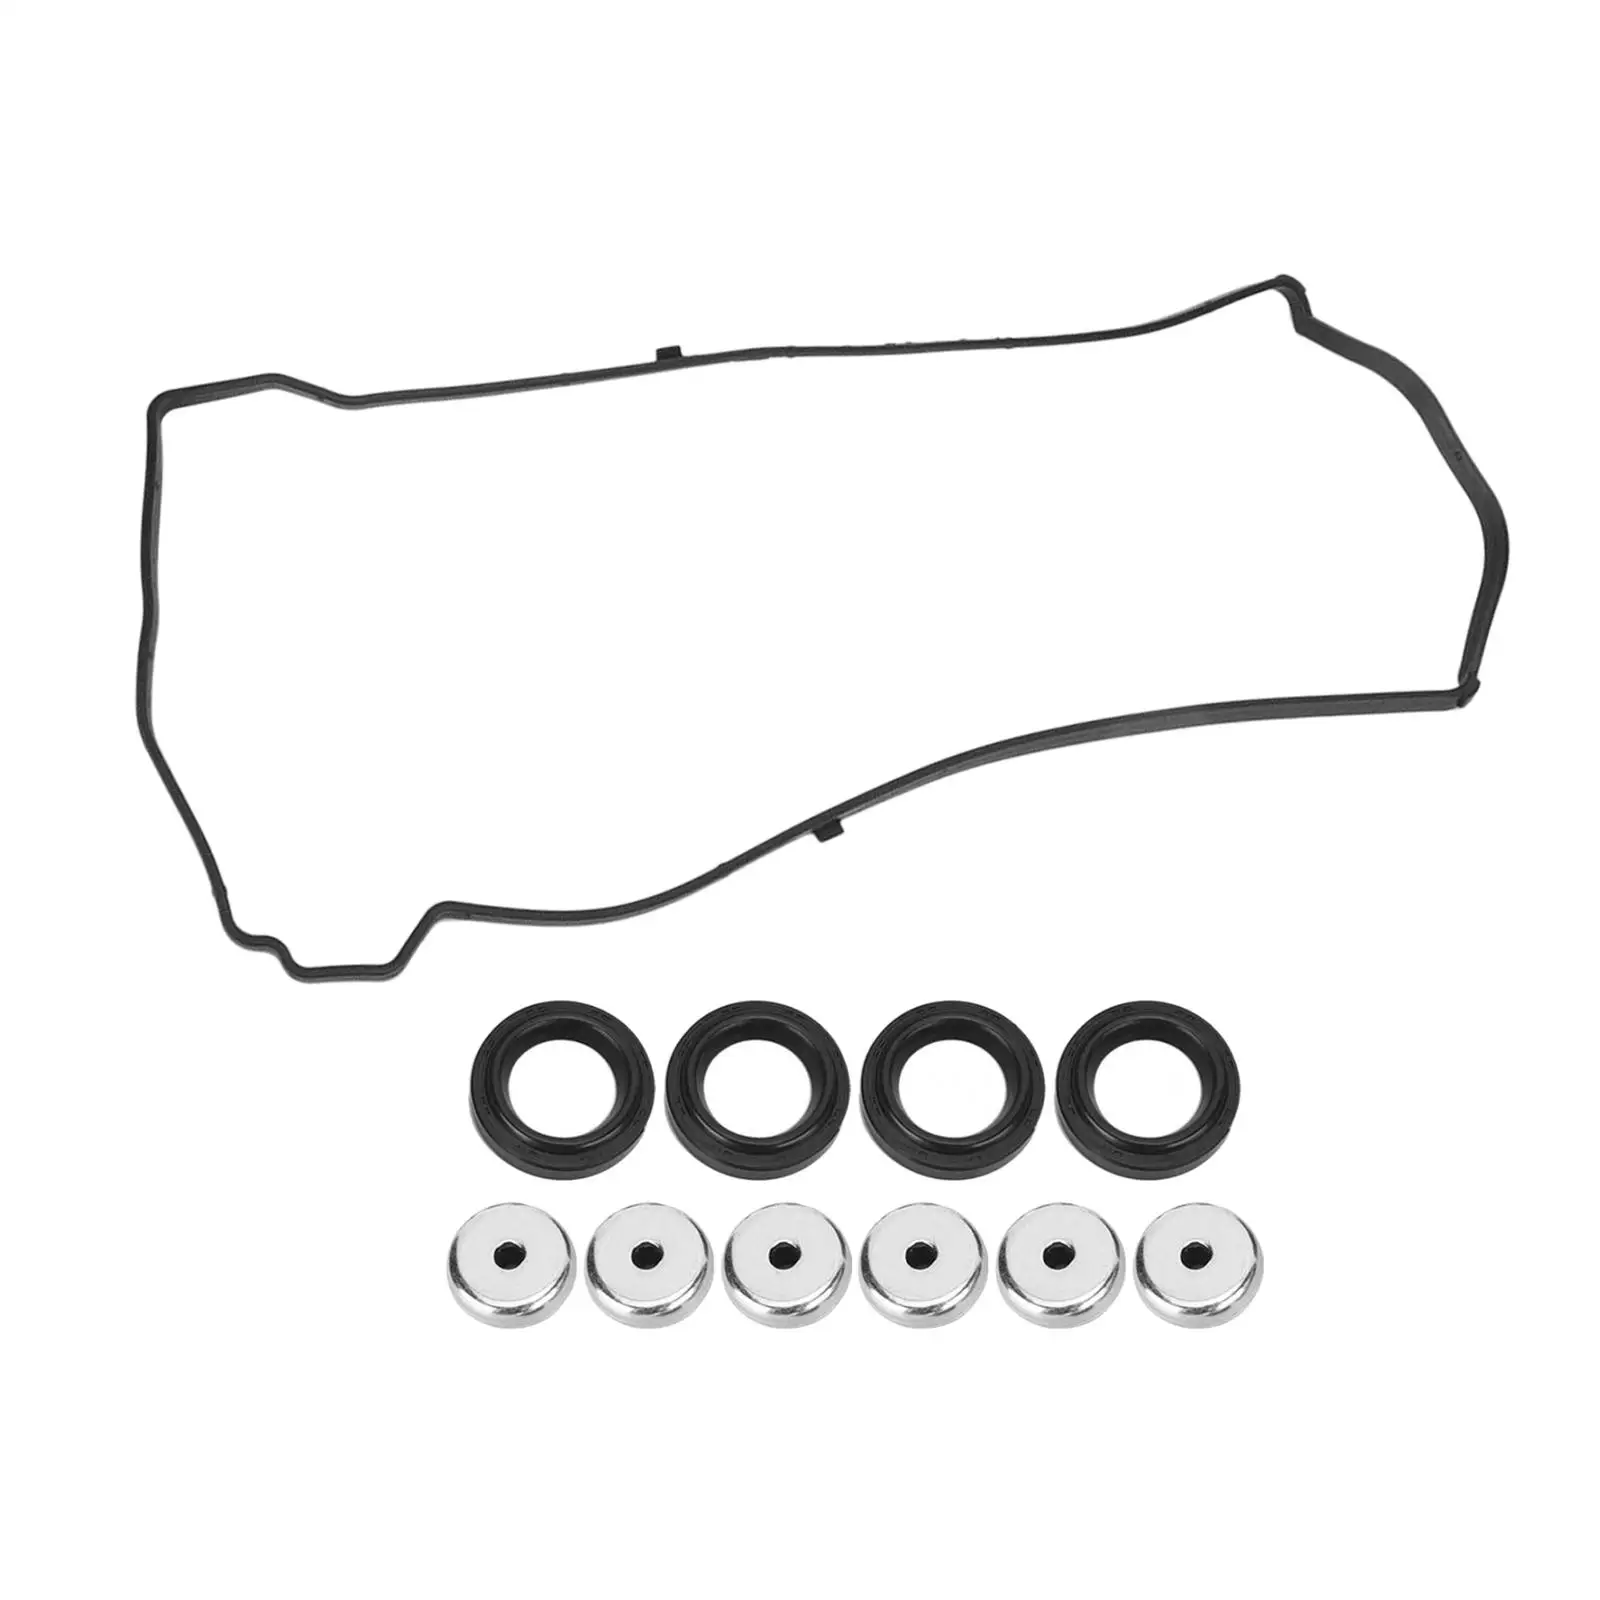 Valve Cover Gasket Seal 12030-pnc-000 Durable Auto Accessory Valve Cover Gasket Set for Honda Acura RSX Tsx K20 K24 CRV